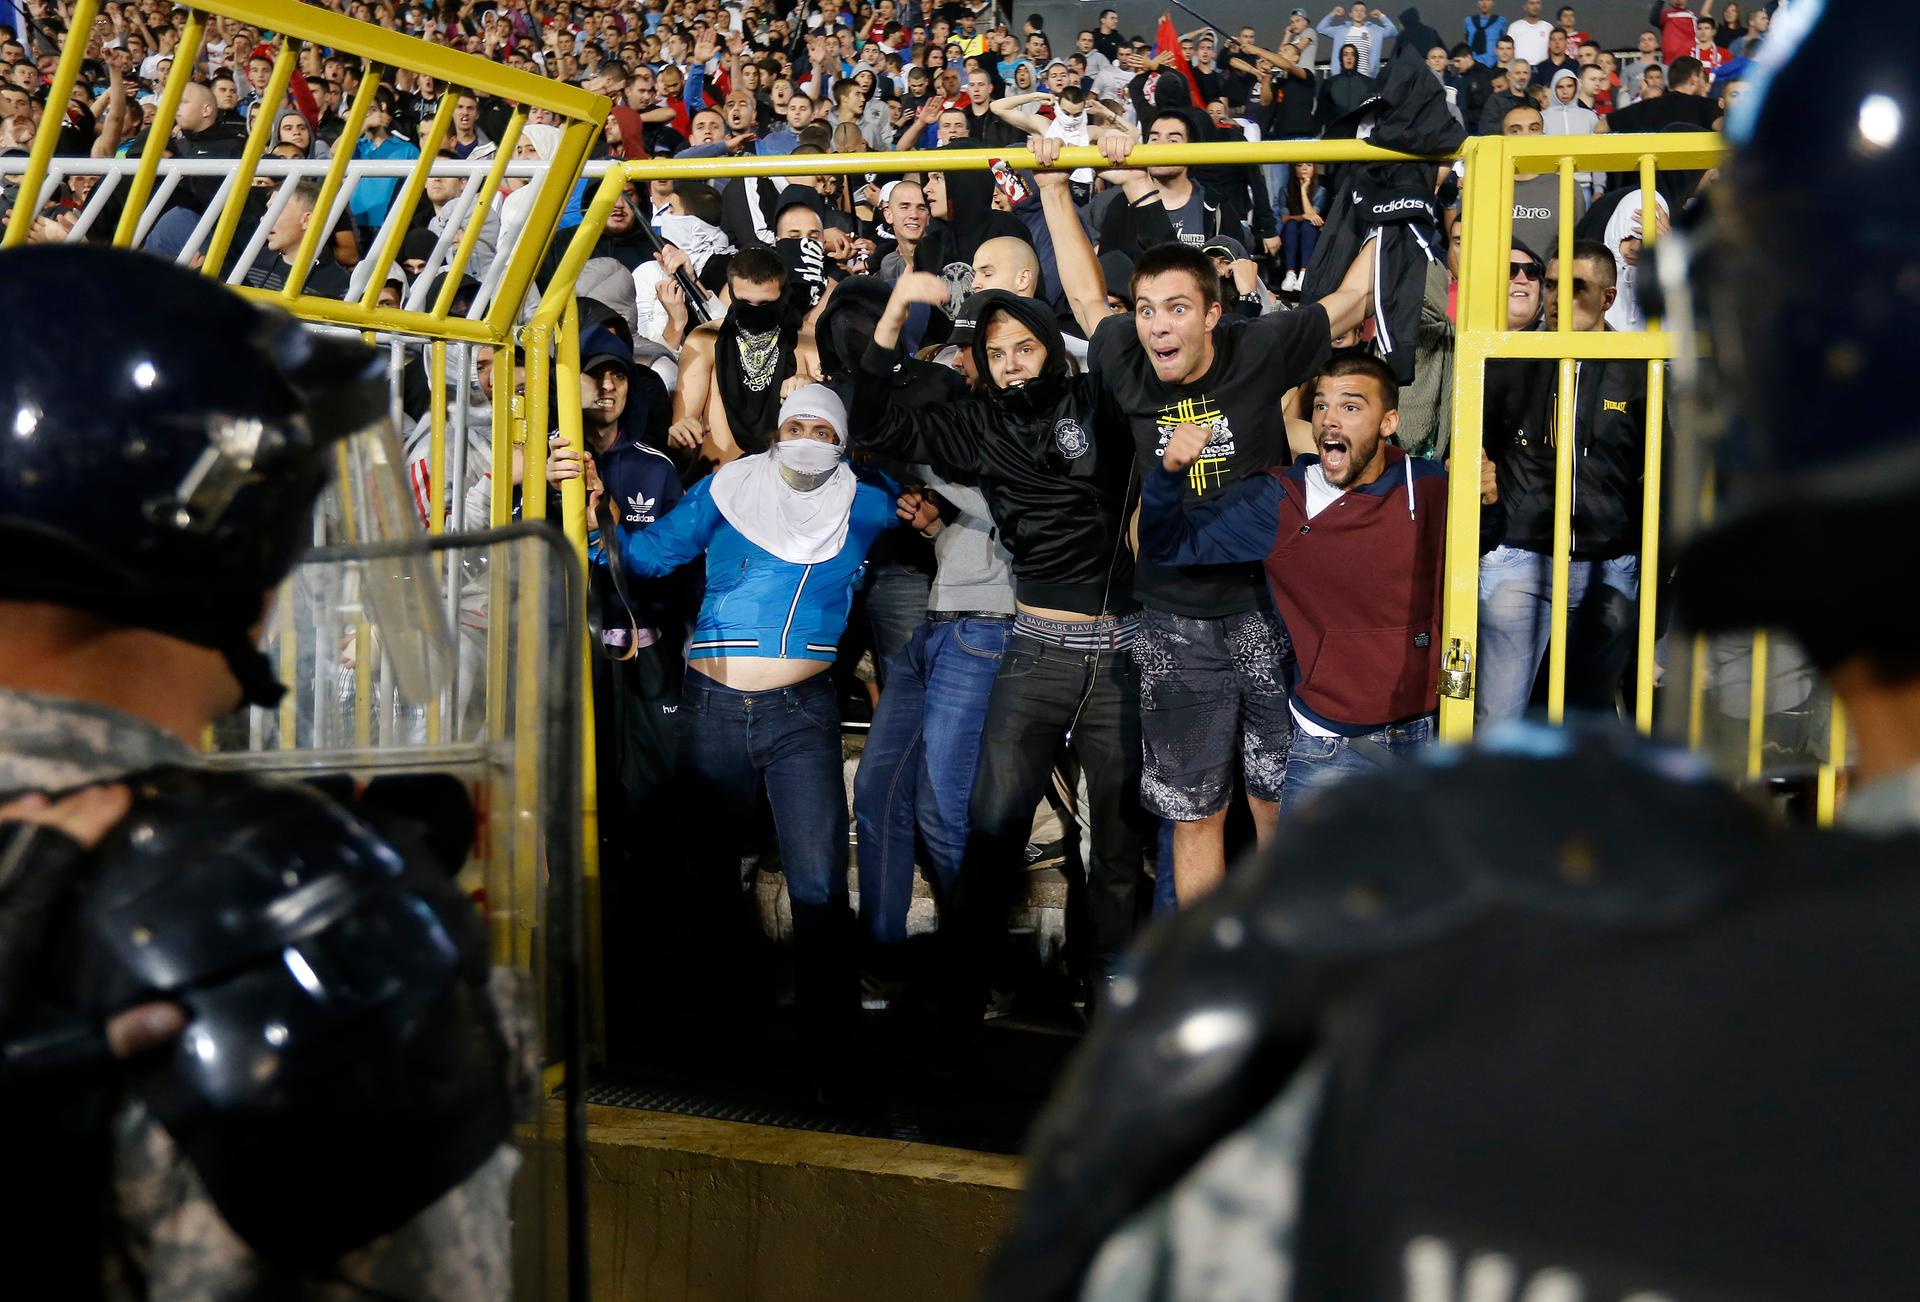 Fans of Serbia confront the riot police during the Euro 2016 Group I qualifying soccer match between Serbia and Albania at the FK Partizan stadium in Belgrade on October 14, 2014.